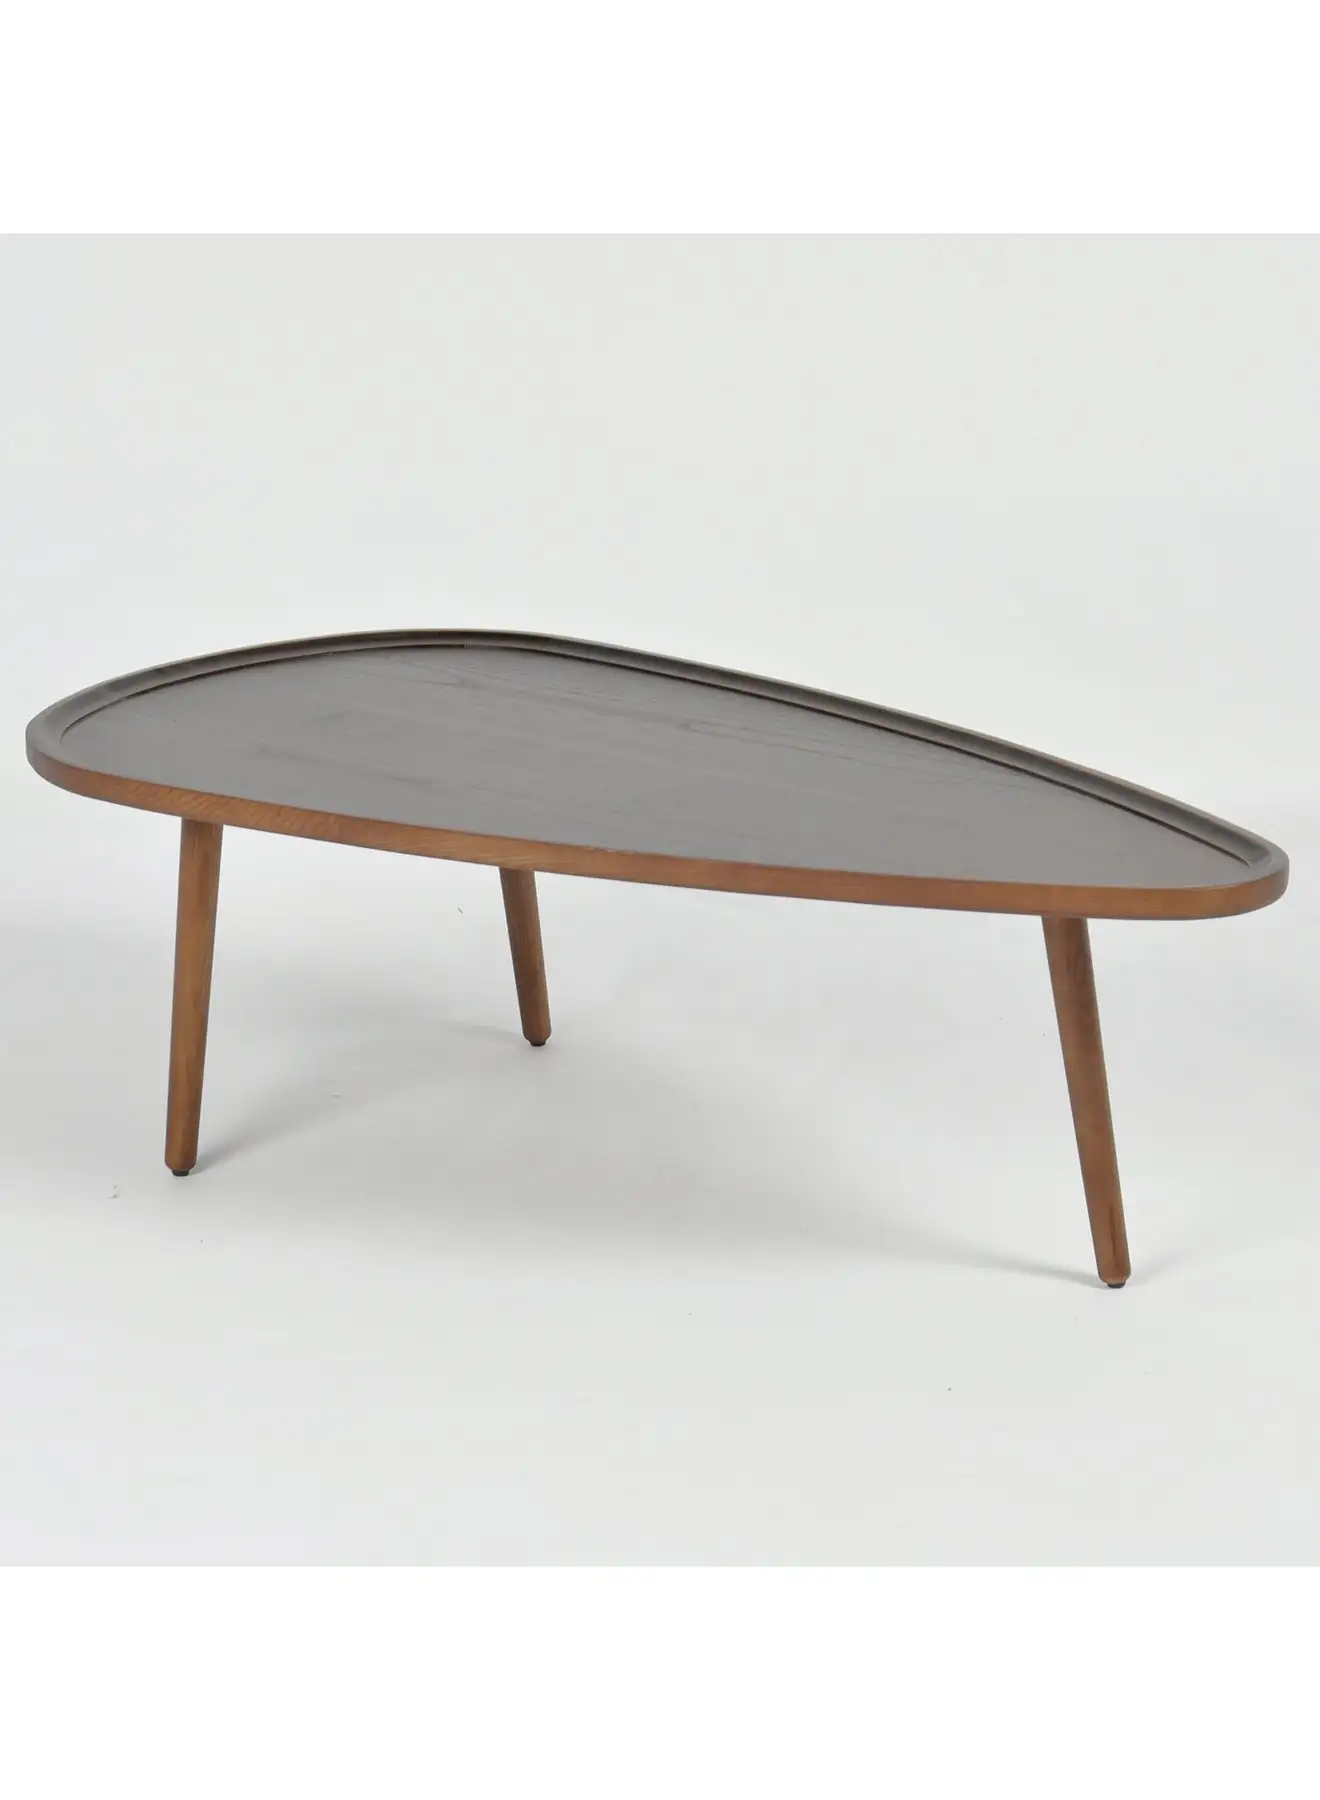 Switch Coffee Table Used As Coffee Corner And Side Table In Walnut Wood - Size 120X65X38